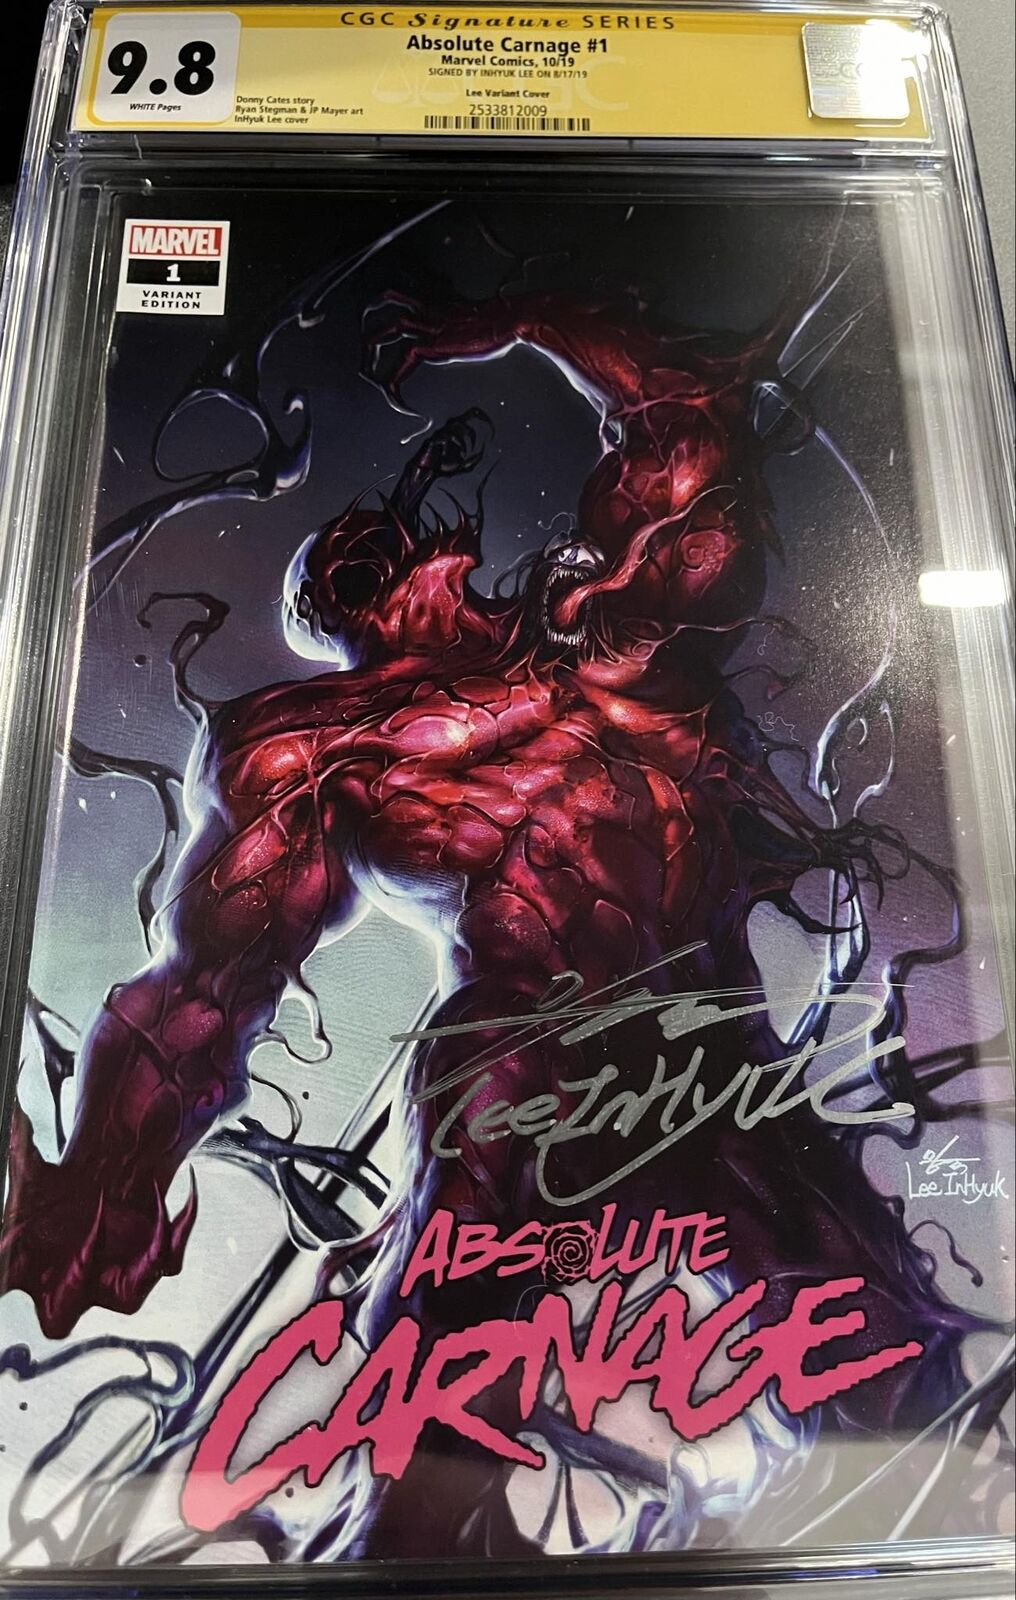 CGC Signature Series 9.8 Absolute Carnage #1 Variant Cover Signed by InHyuk Lee